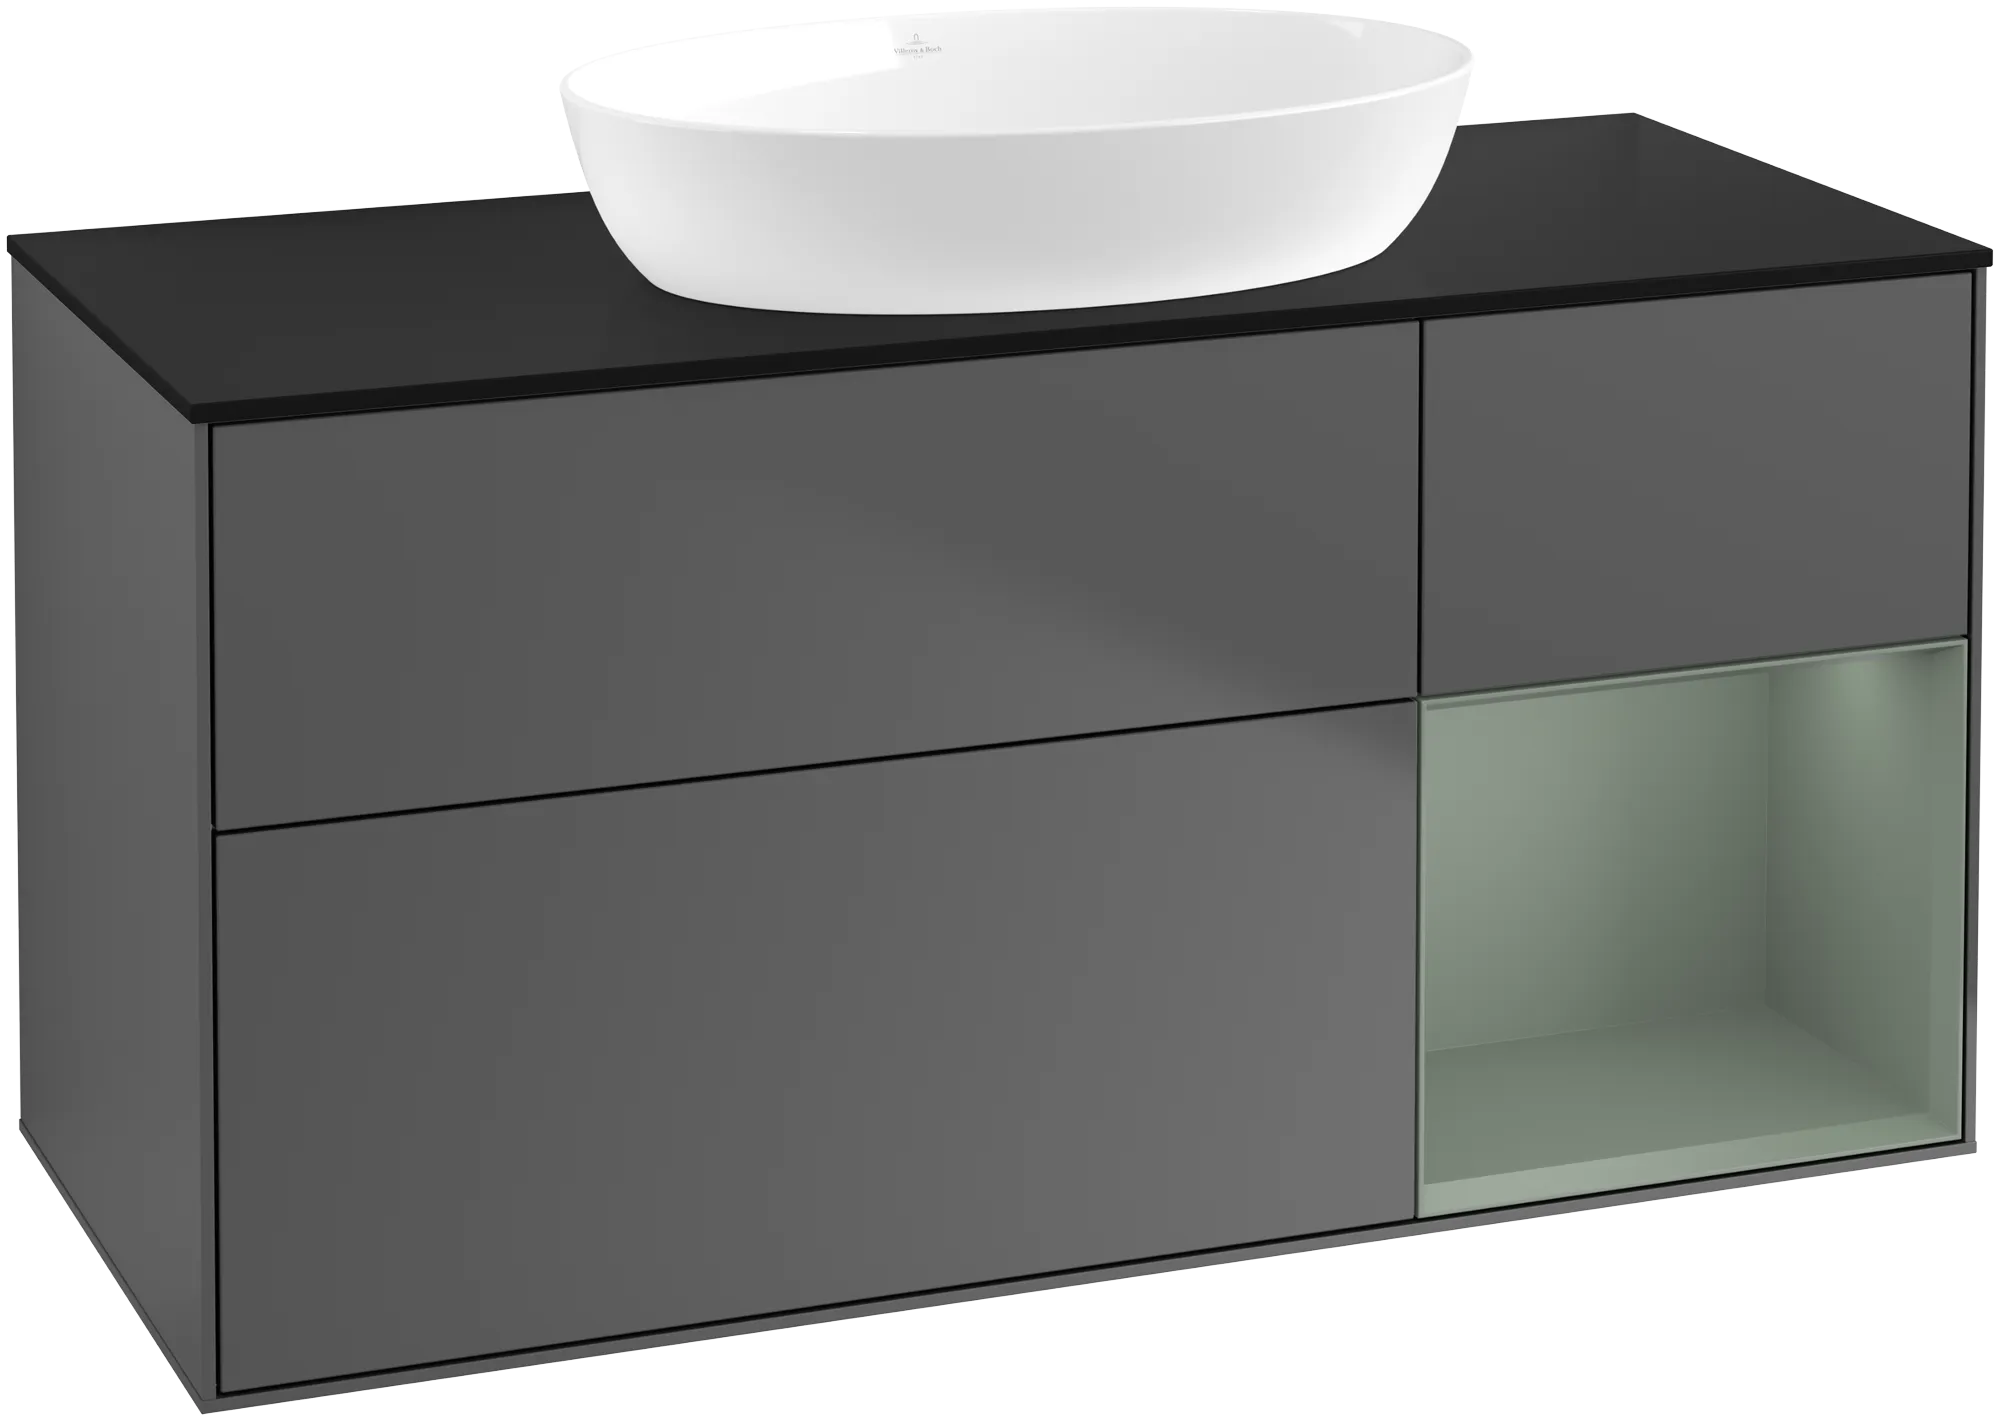 Obrázek VILLEROY BOCH Finion Vanity unit, with lighting, 3 pull-out compartments, 1200 x 603 x 501 mm, Anthracite Matt Lacquer / Olive Matt Lacquer / Glass Black Matt #GA72GMGK